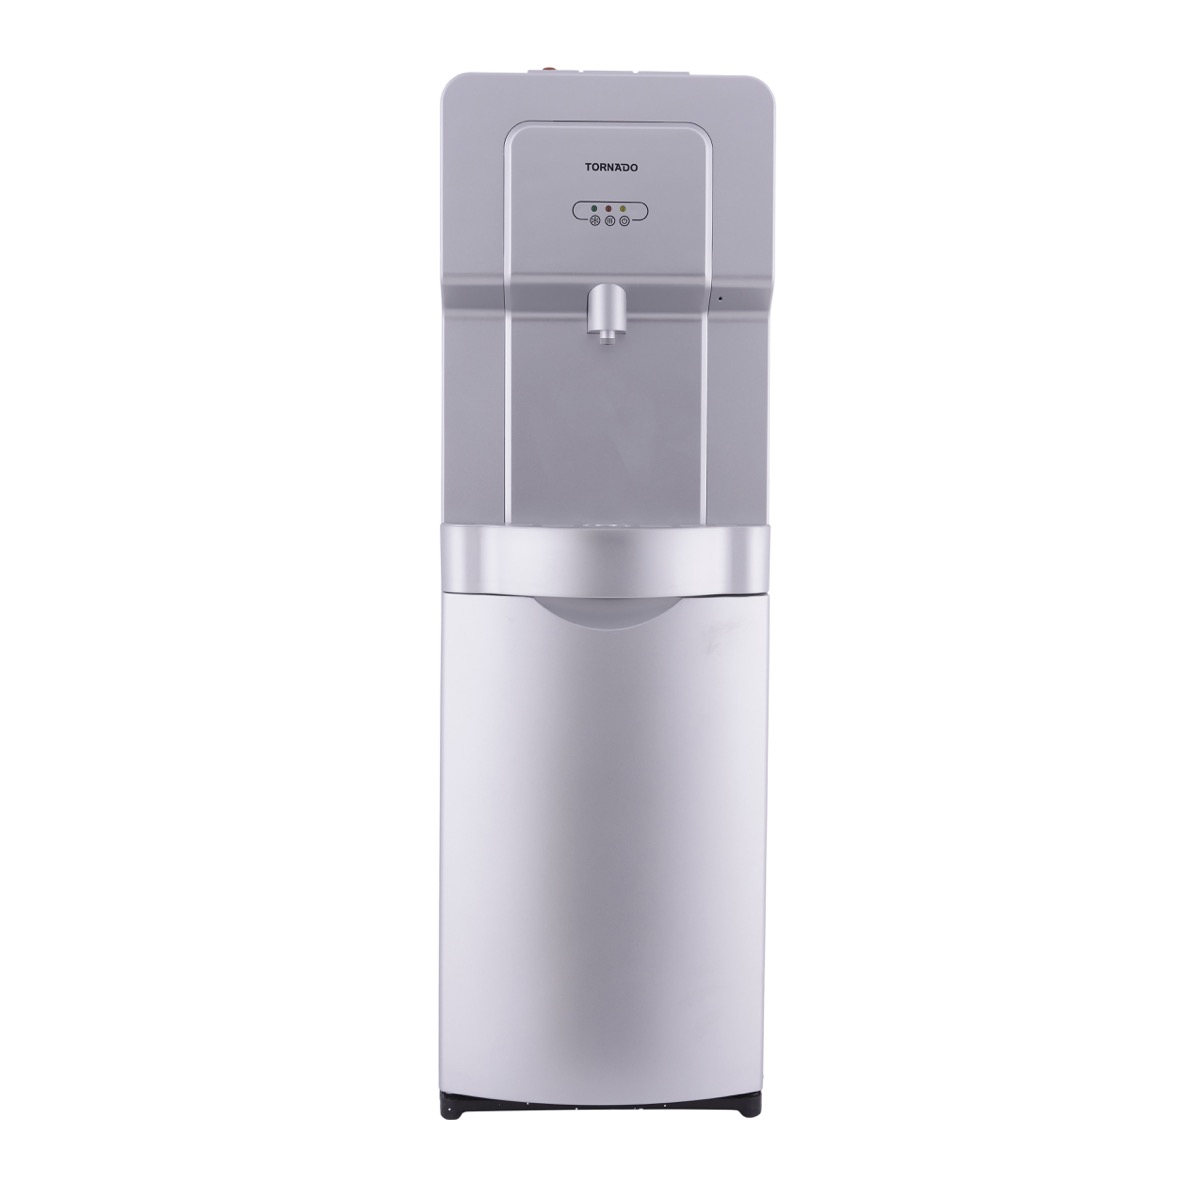 Tornado Hot, Cold And Normal Water Dispenser with Cabinet, Silver - H40ABES